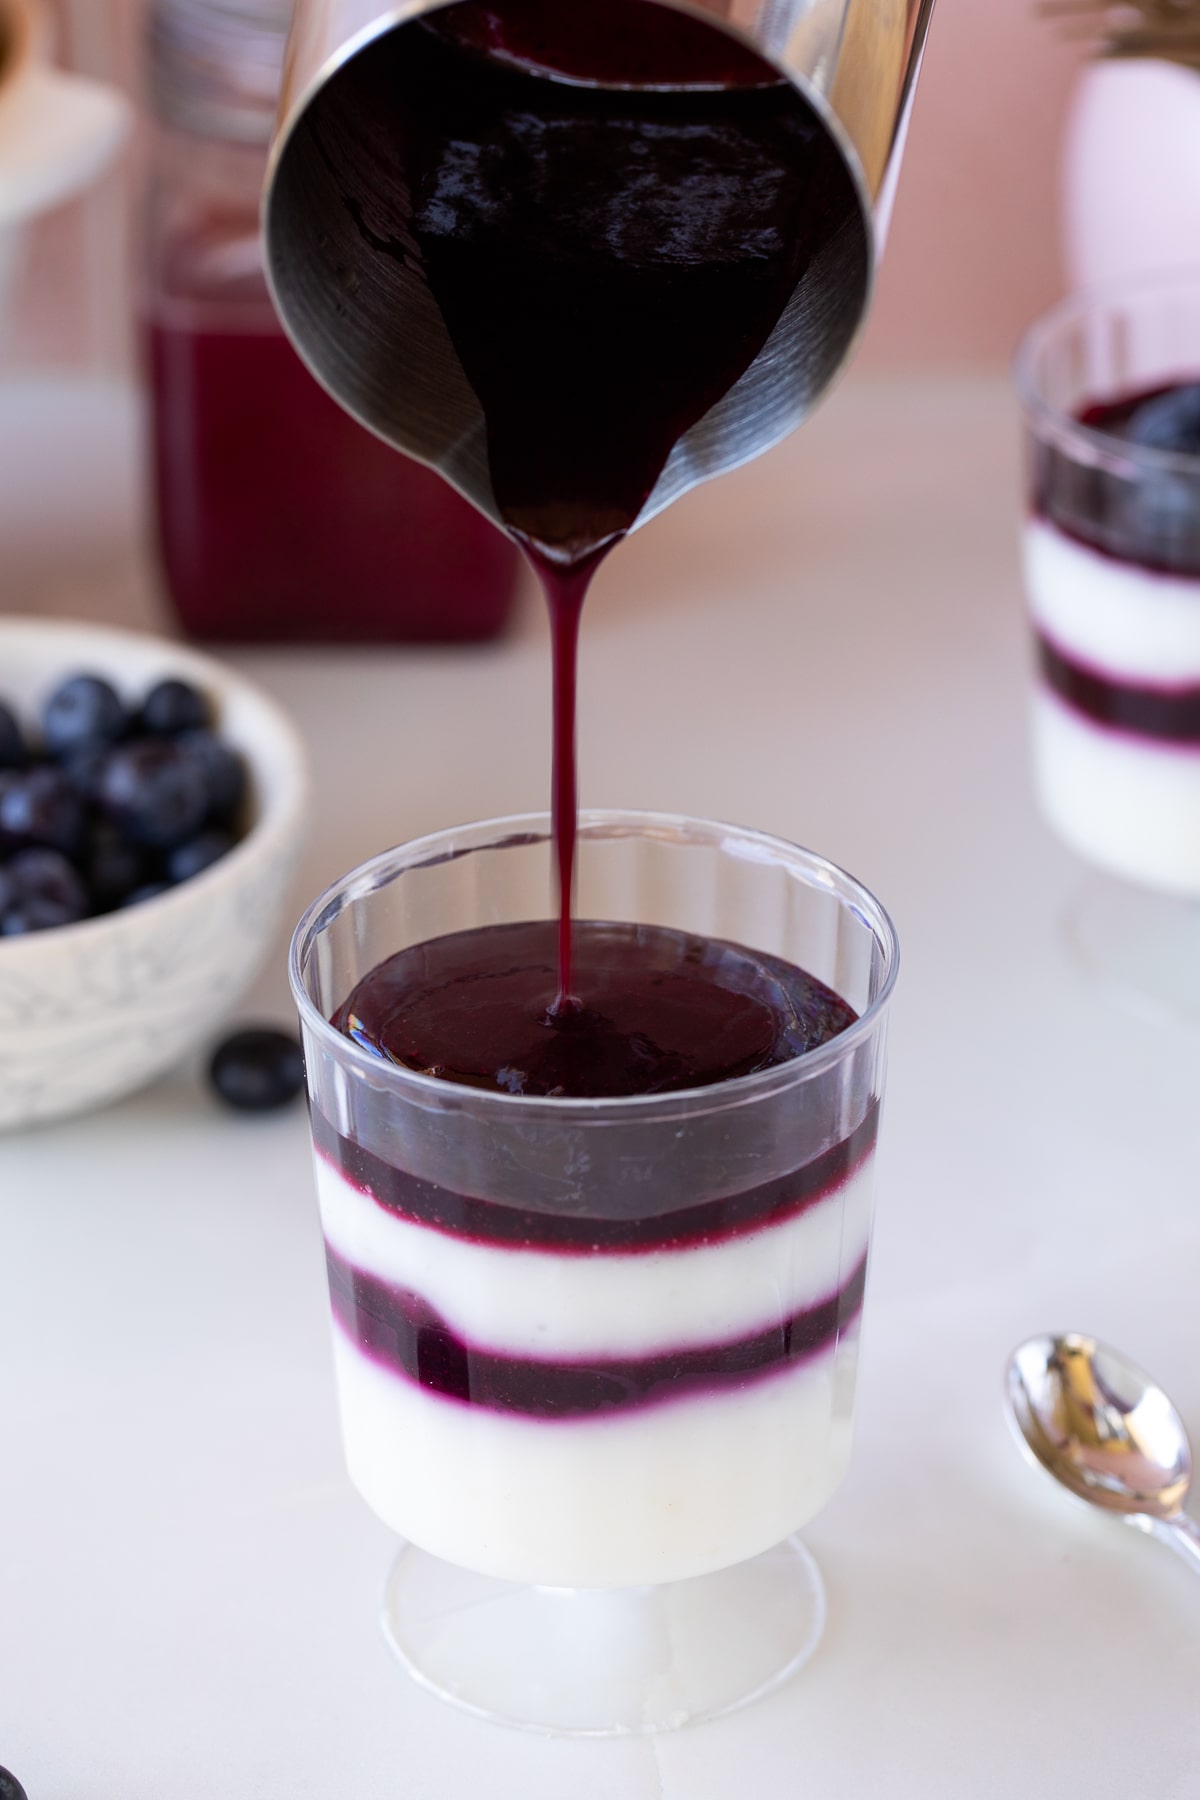 pouring blueberry coulis over panna cotta.